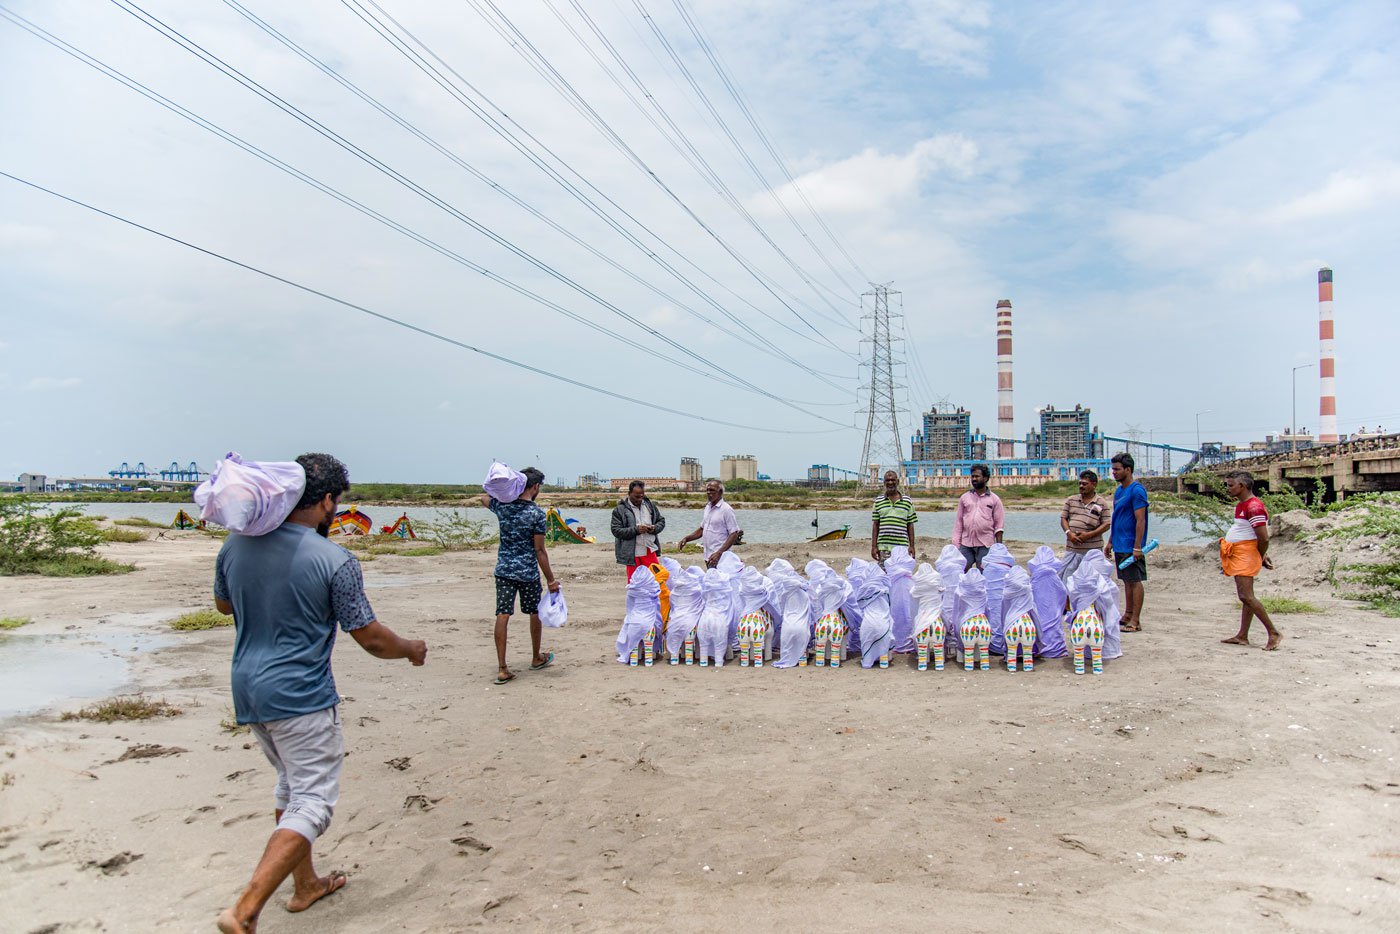 Fishermen carrying idols on their shoulders. From here they will go to their villages by boat. The Kosasthalaiyar river near north Chennai’s thermal power plant, in the background.